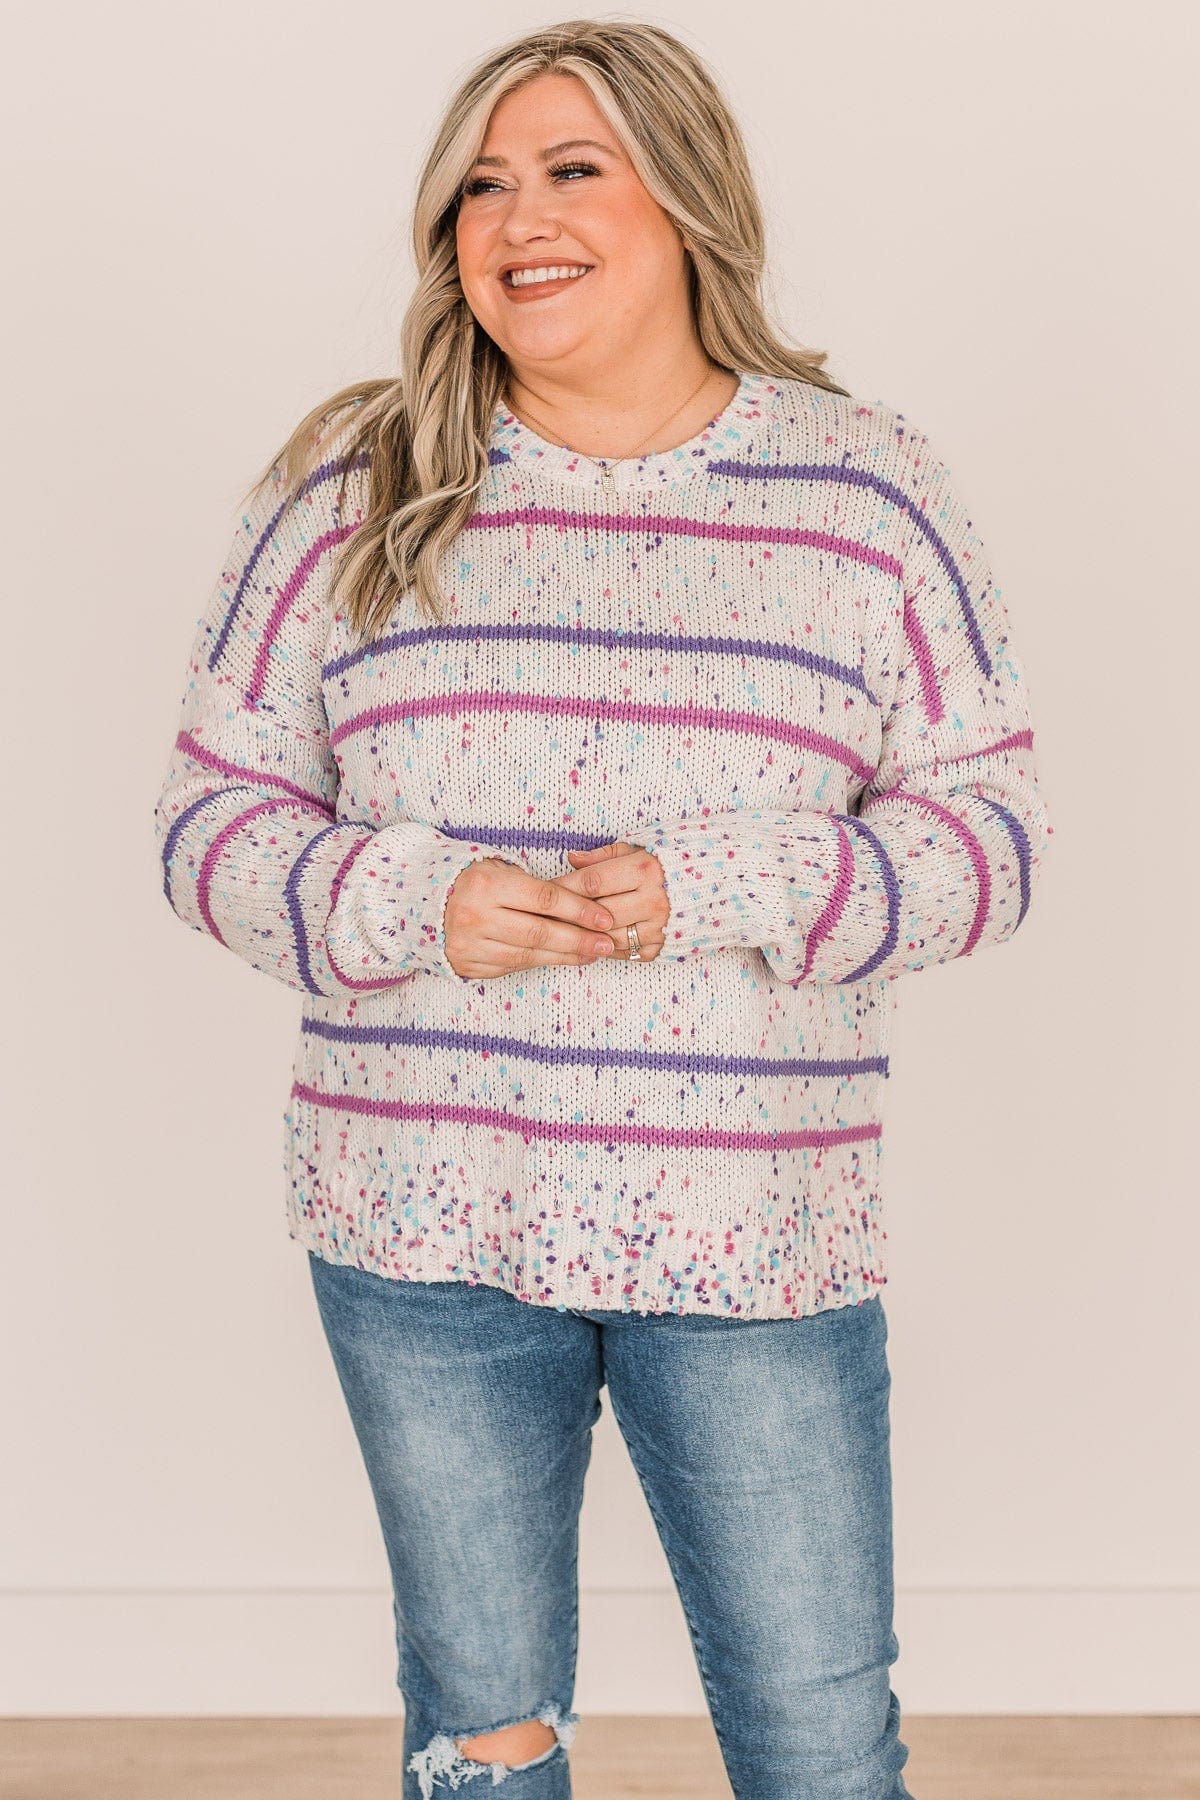 Stay Tuned Confetti Knit Sweater- Ivory & Lavender – The Pulse